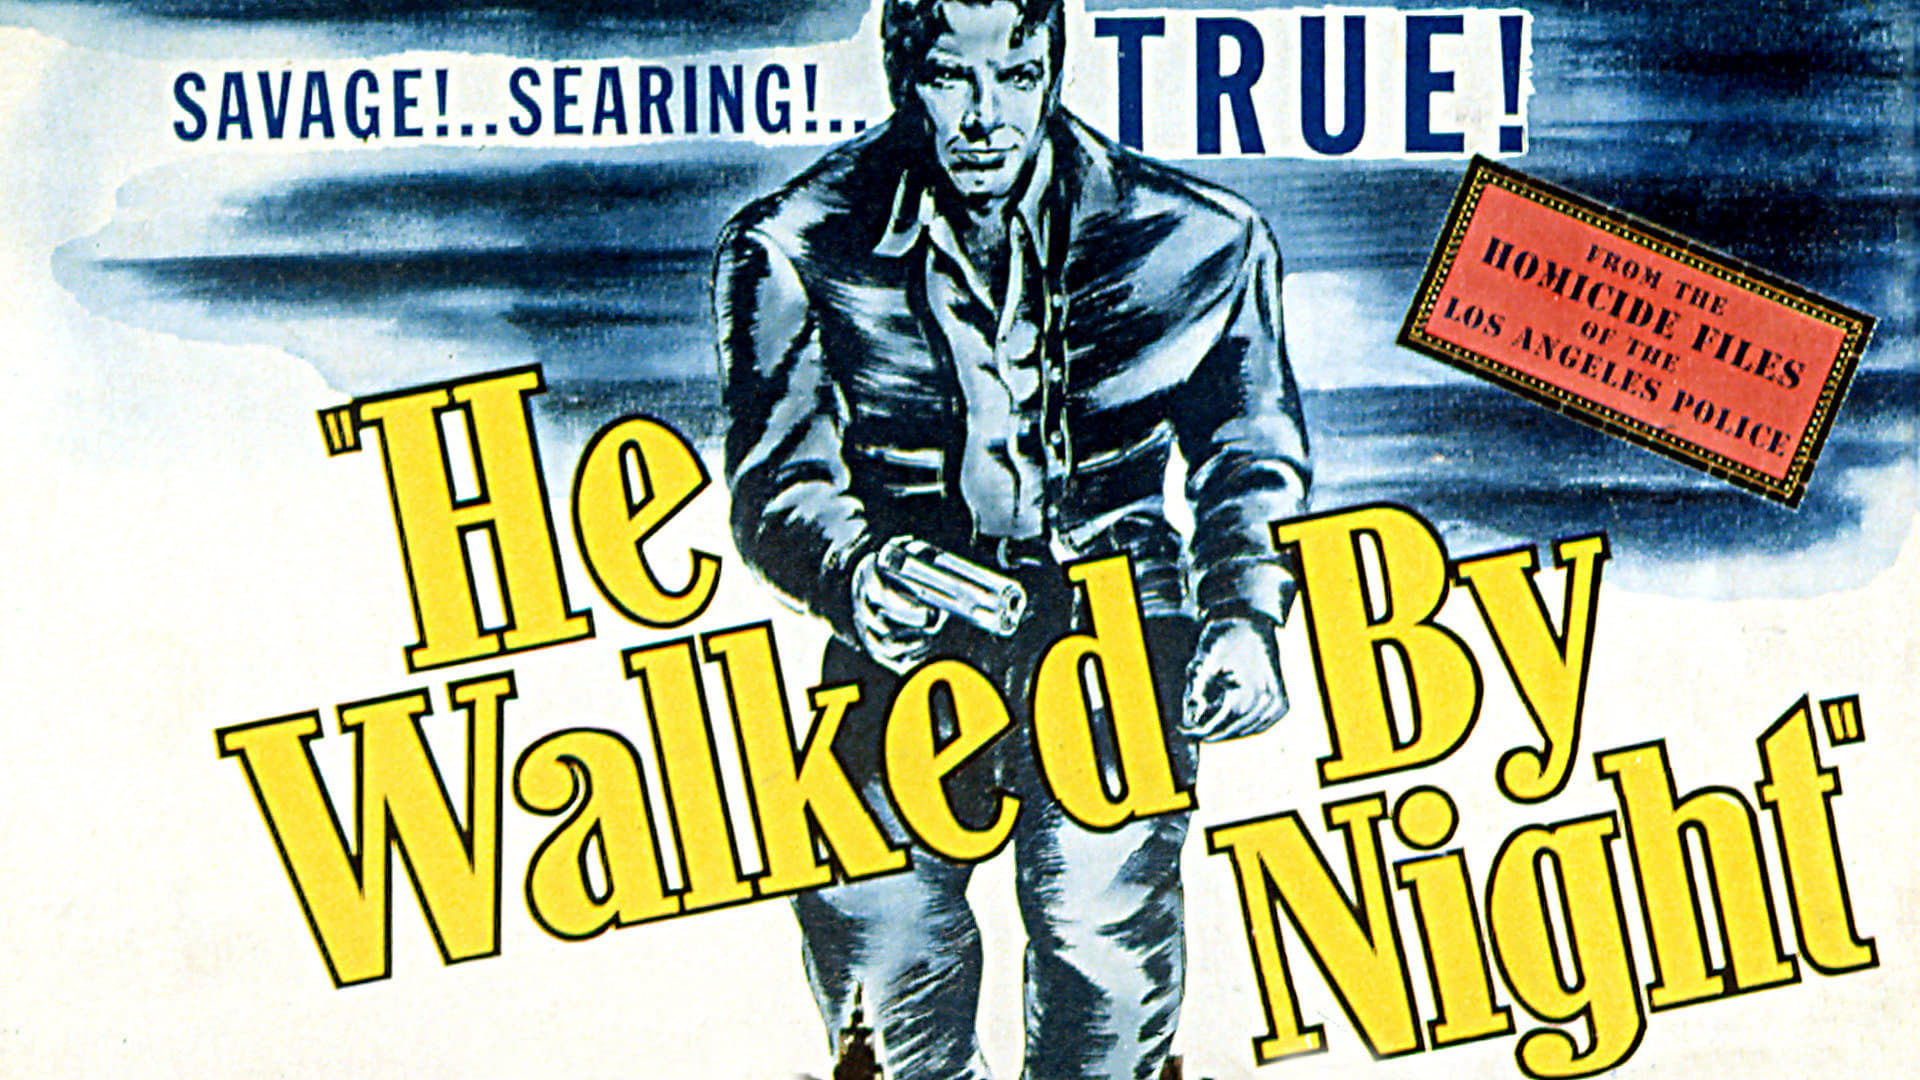 He Walked by Night (1949)